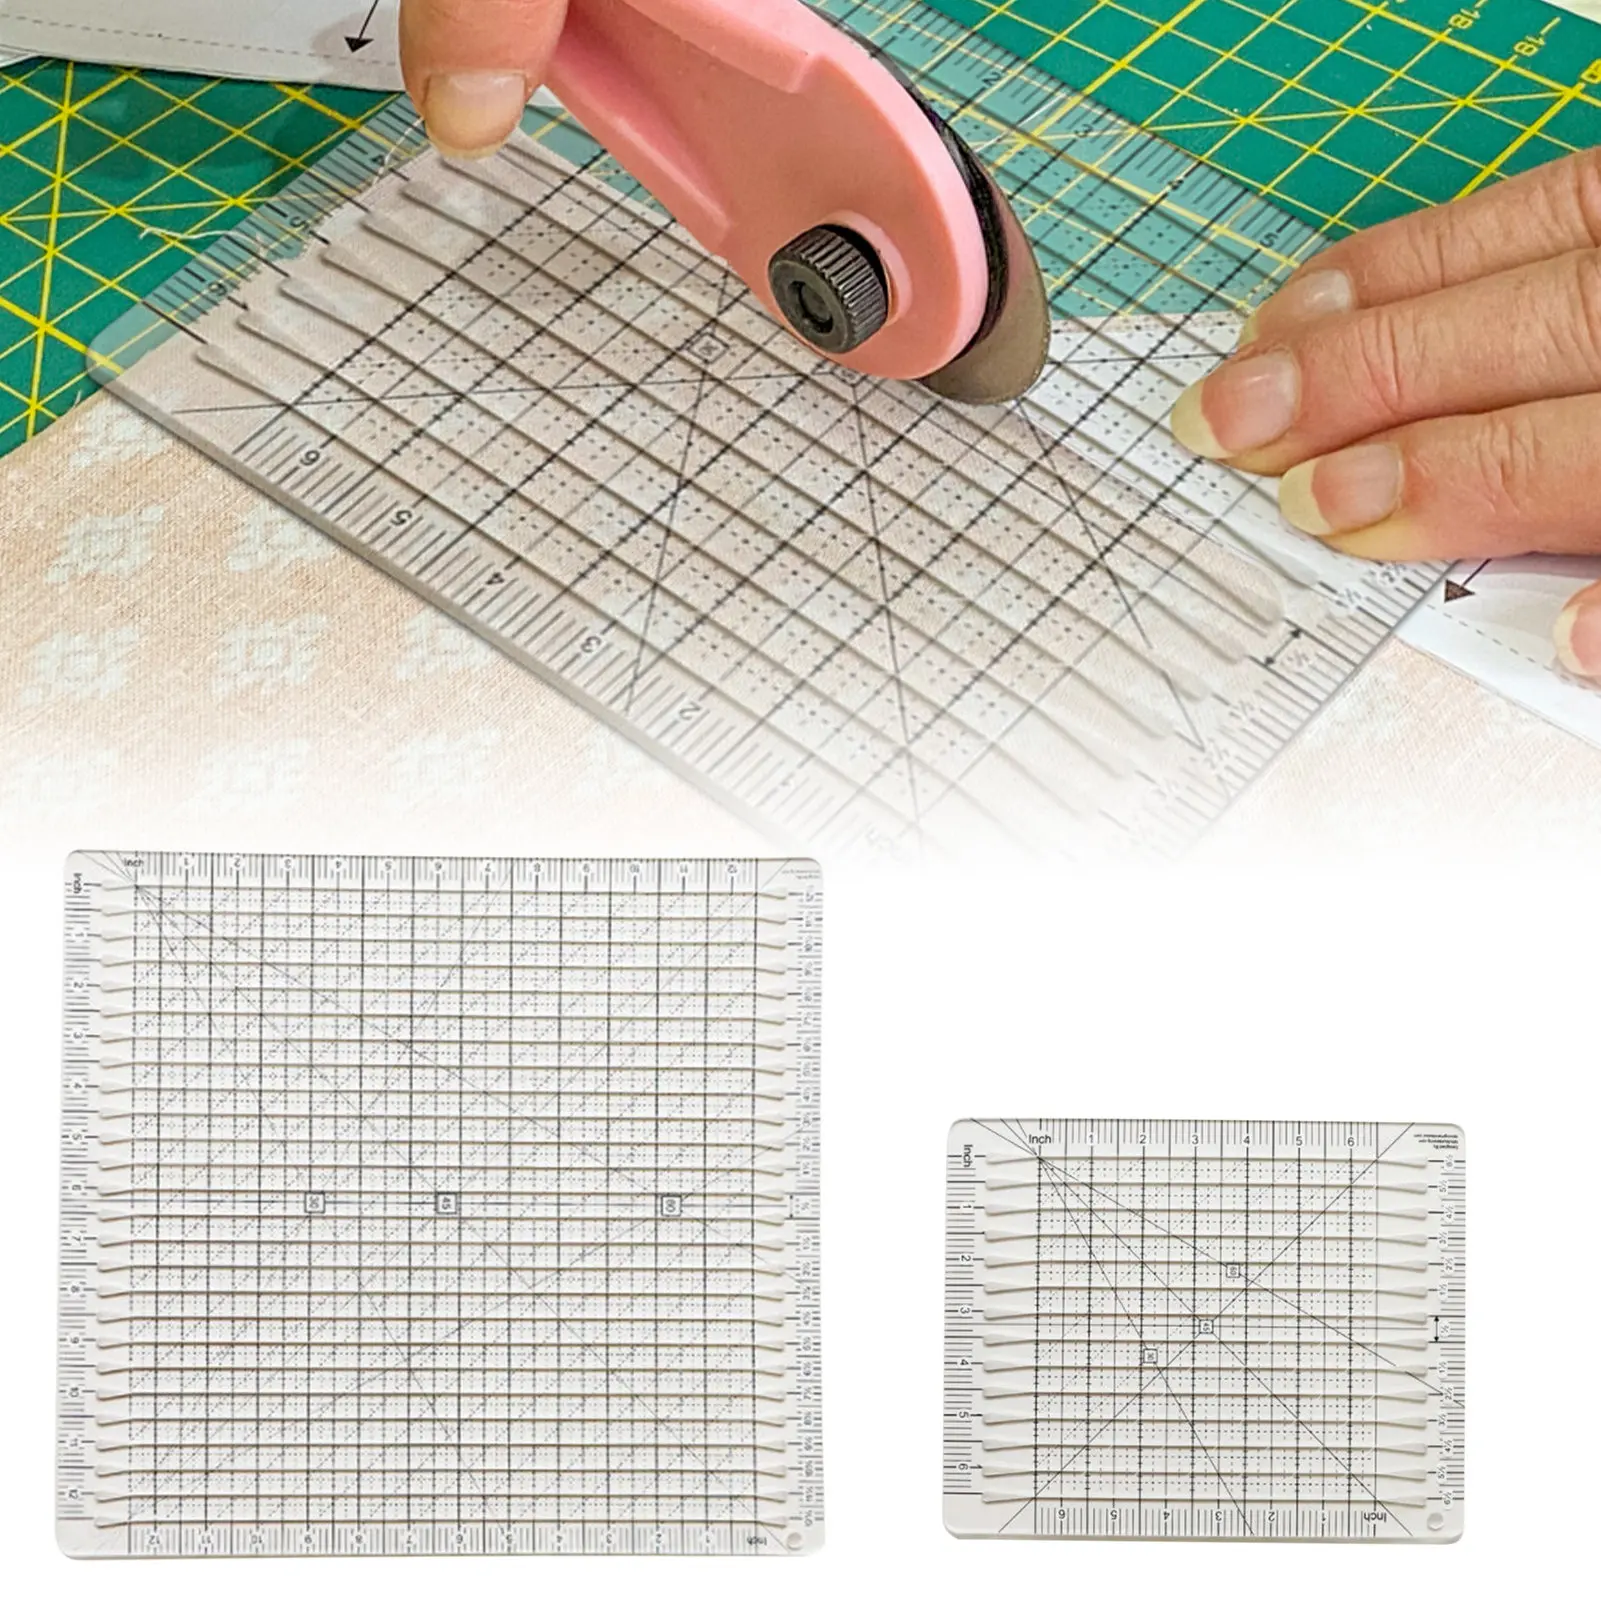 Fabric Cutting Ruler Quilting Supplies And Tools Tape Measure Sewing Acrylic Ruler Clear Ruler Sewing Creative Ruler Grids Strip